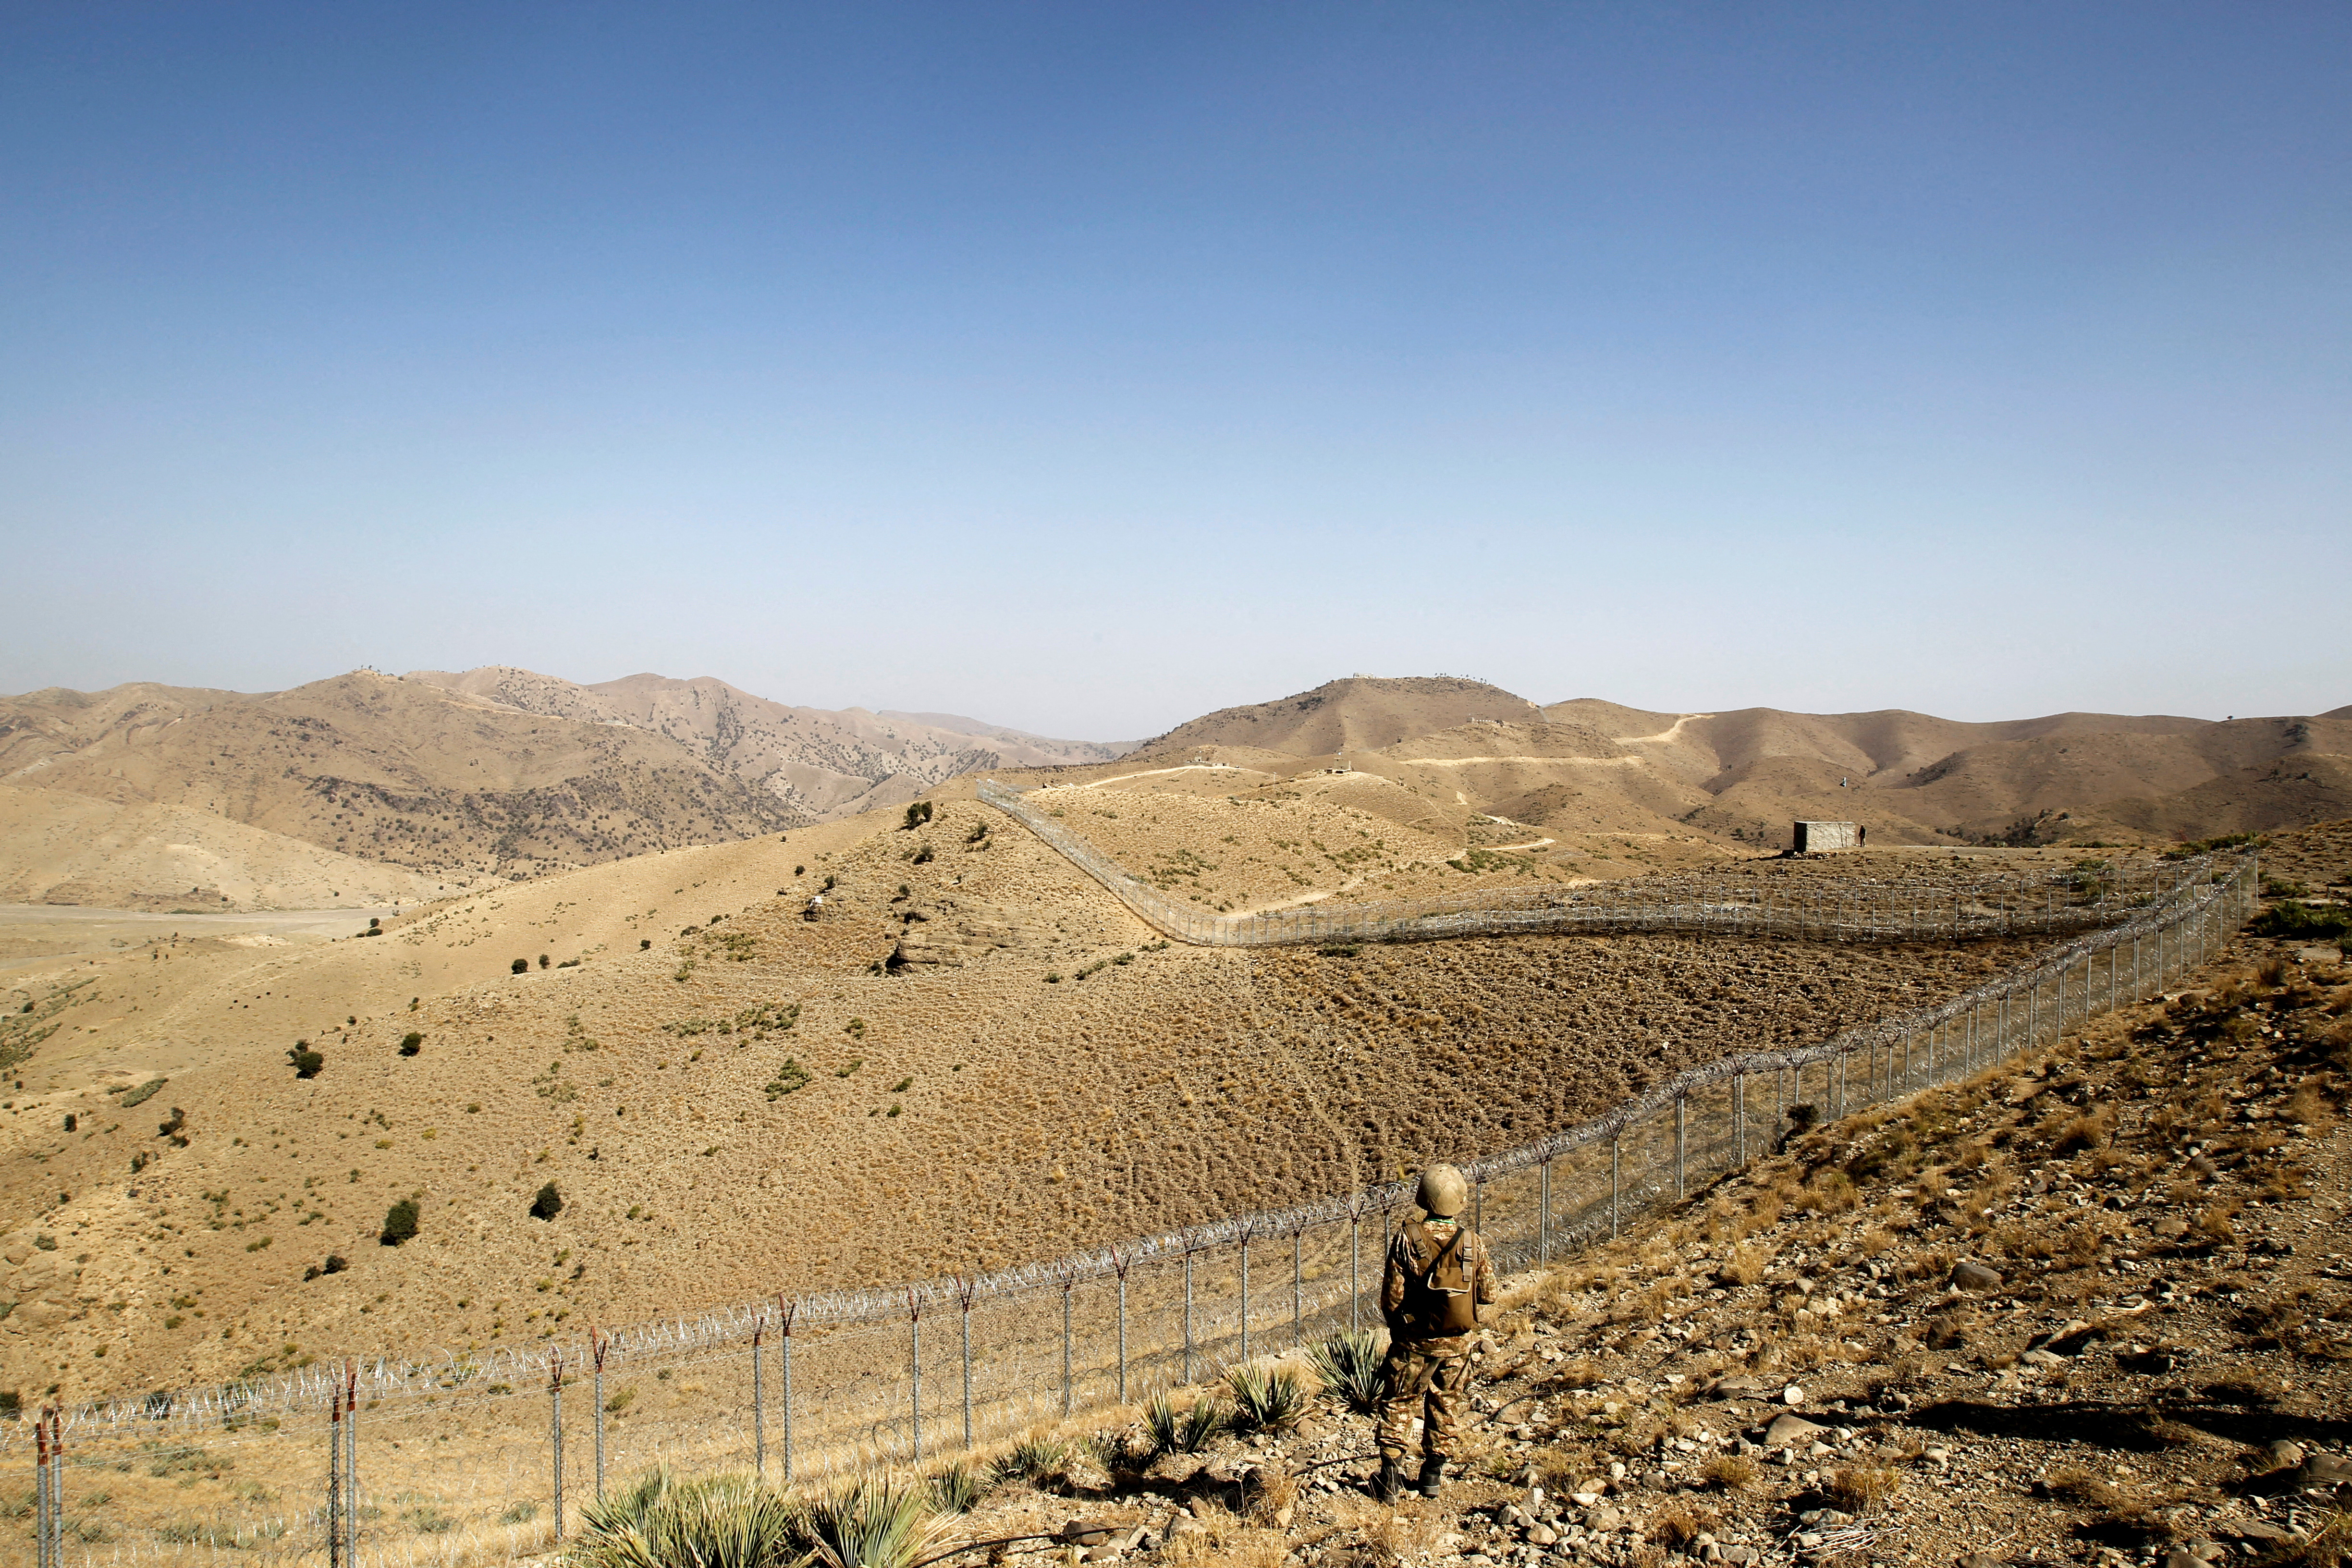 A Pakistani soldier stands guard along the border fence outside the Kitton outpost on the border with Afghanistan in North Waziristan, Pakistan October 18, 2017. REUTERS/Caren Firouz/File Photo/File Photo